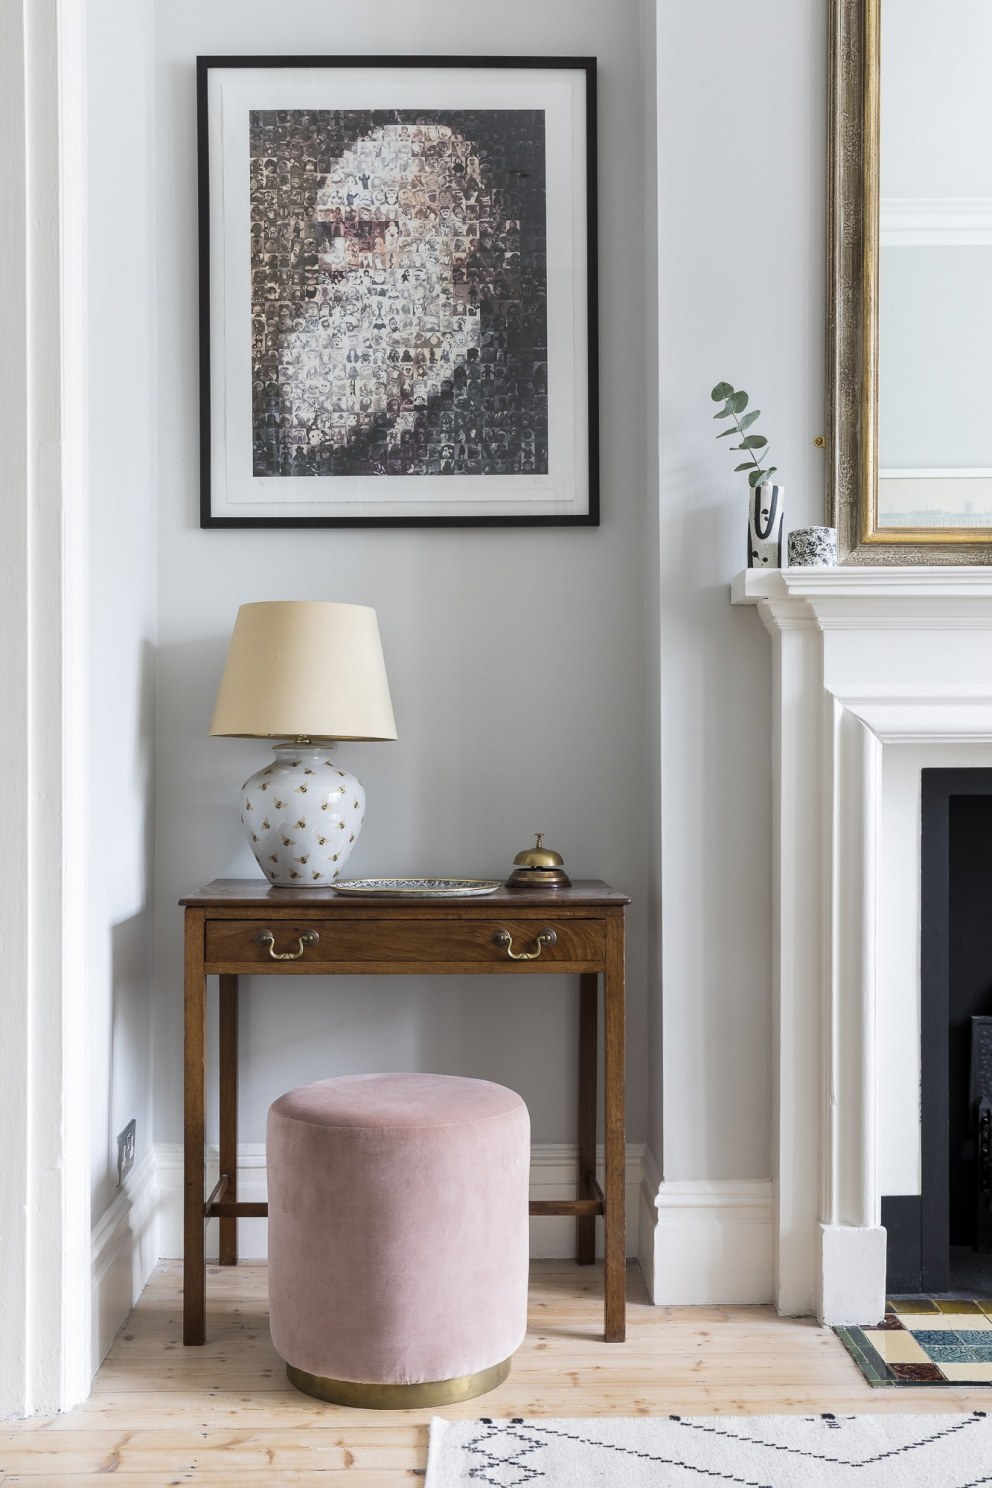 South London Family Home | Reception Room Detail | Interior Designers